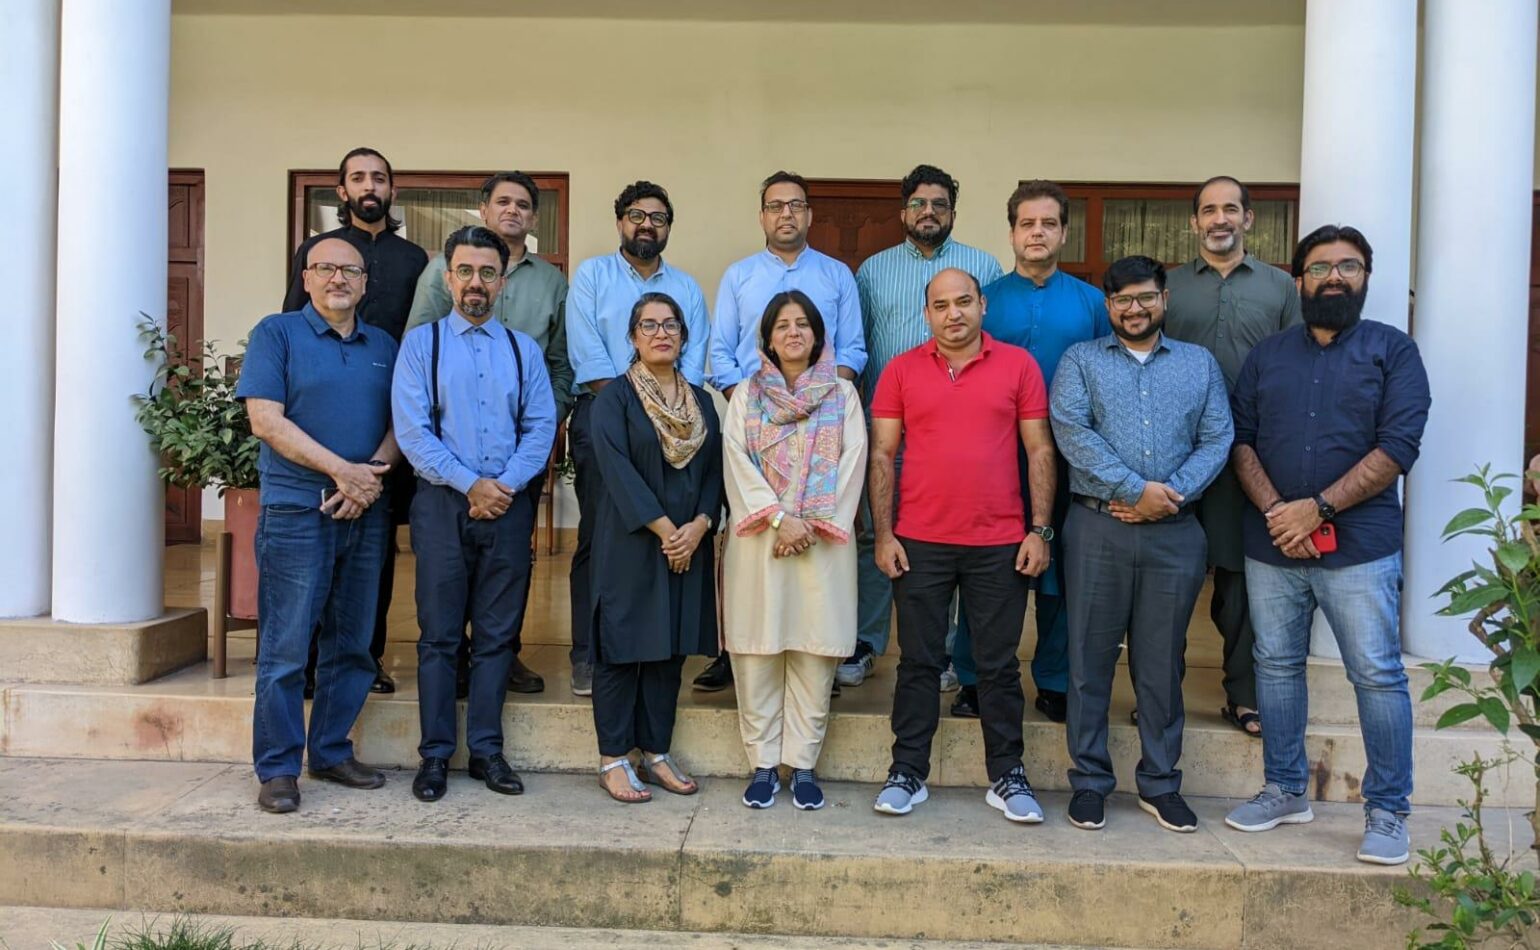 MMFD hosts Strategy Exercise with Digital Editors for Economic Revival of Newsrooms in Pakistan